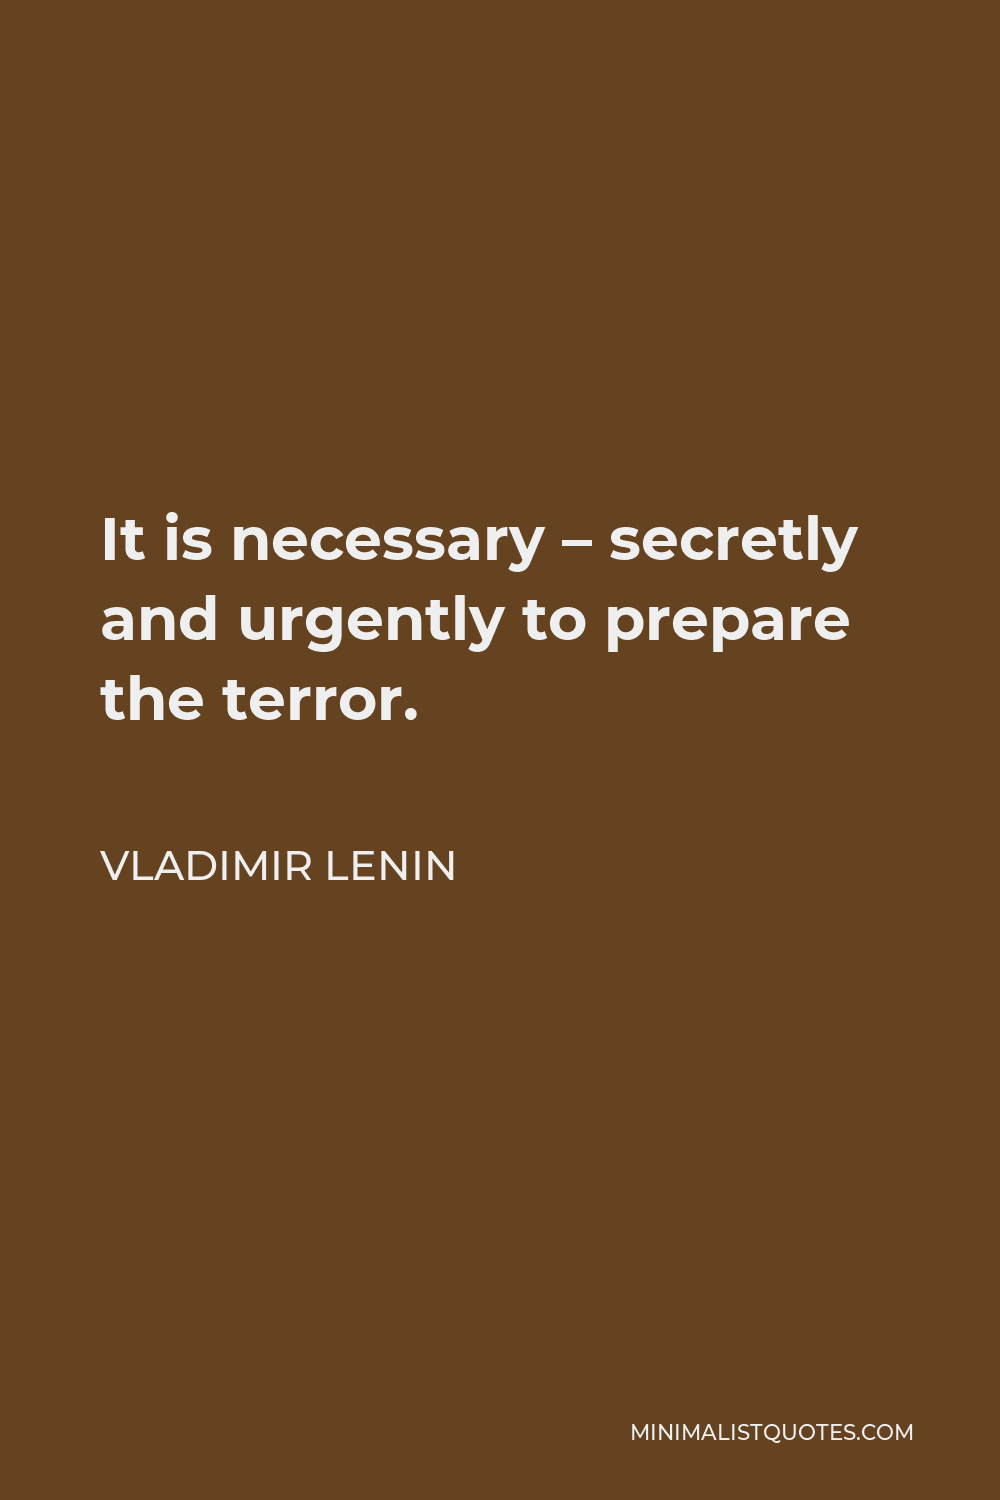 Vladimir Lenin Quote - It is necessary – secretly and urgently to prepare the terror.